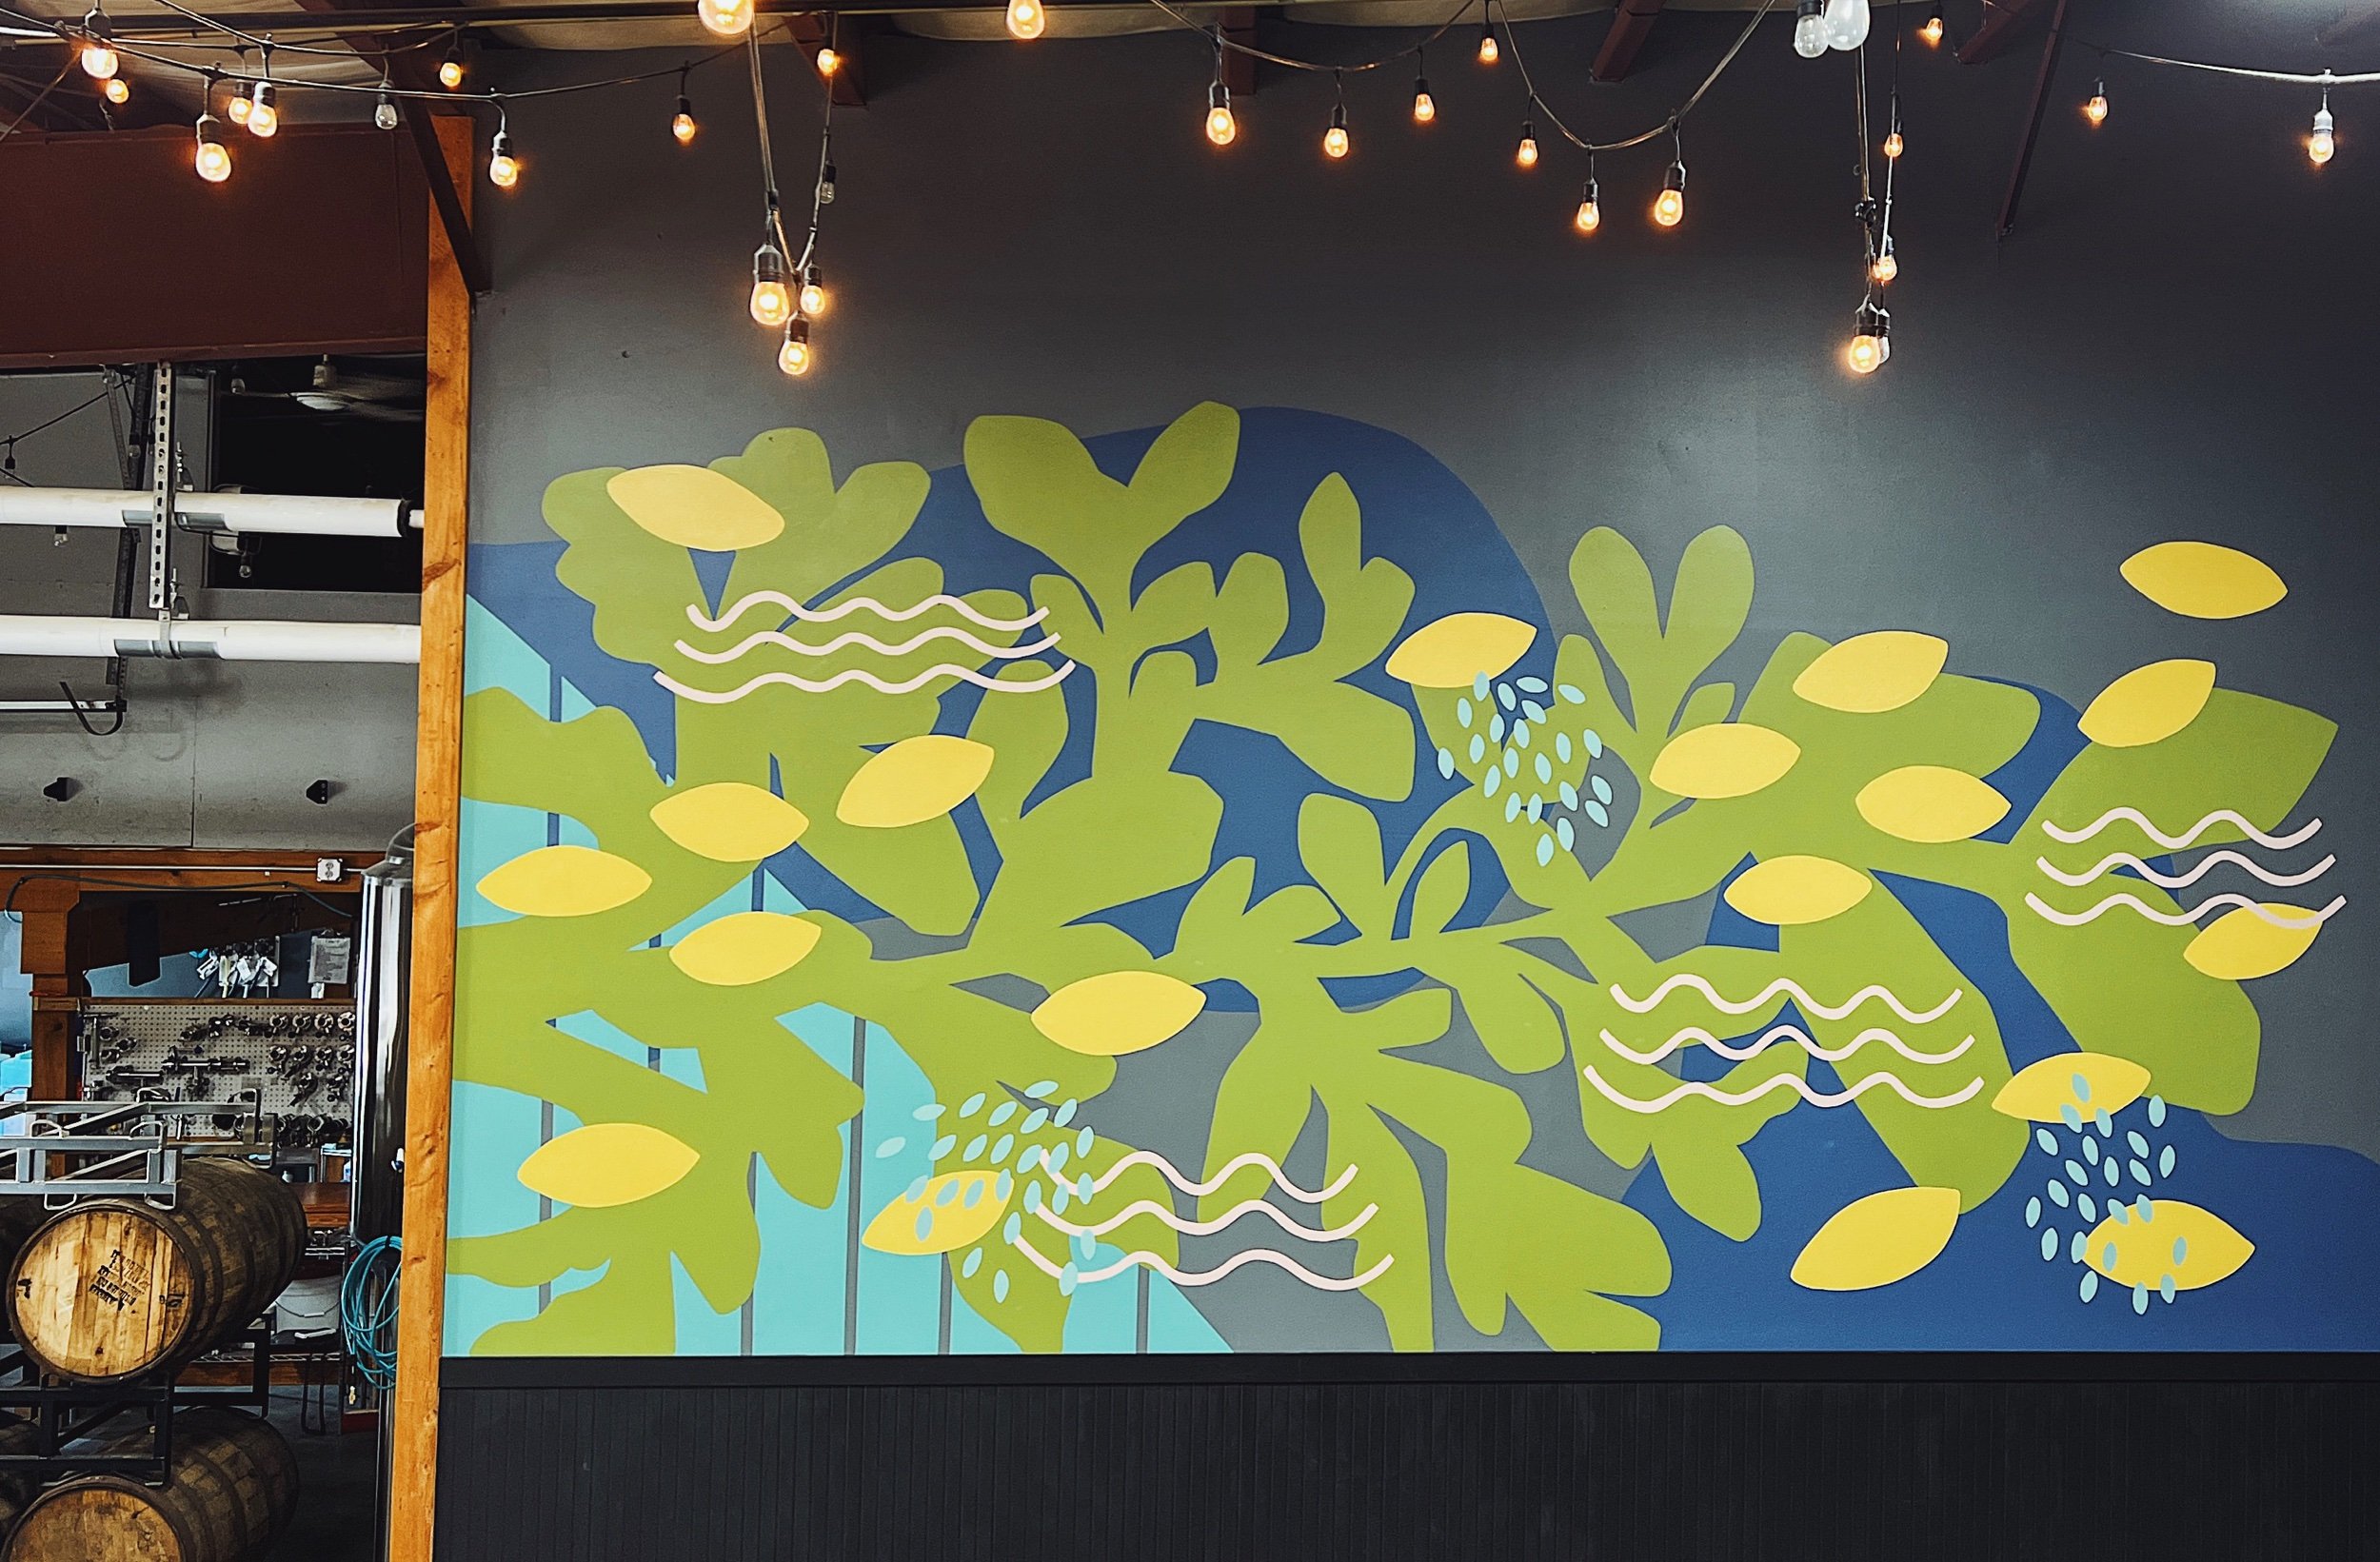  Commissioned mural for Battery Steele Brewing in Portland, ME. This piece was designed and painted by hand in July 2022. 